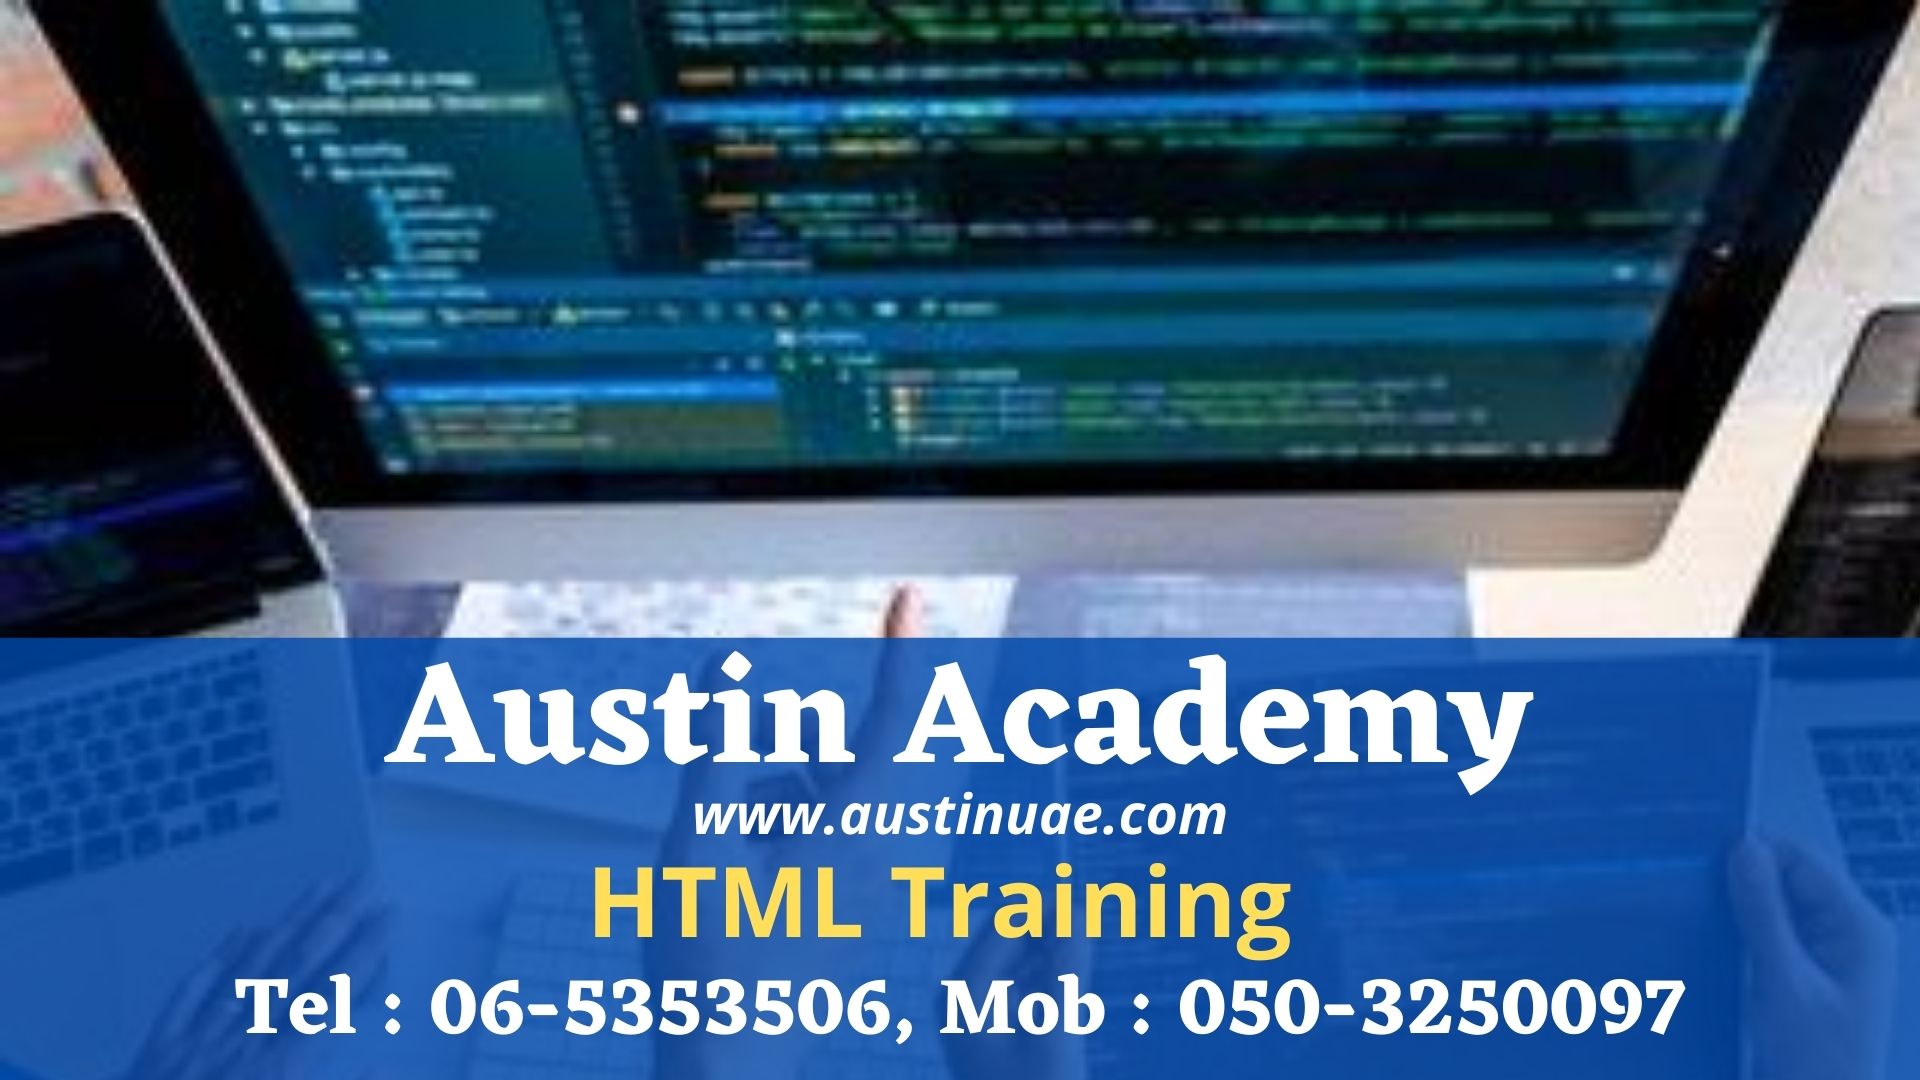 Html Training In Sharjah With Best Offer 0503250097